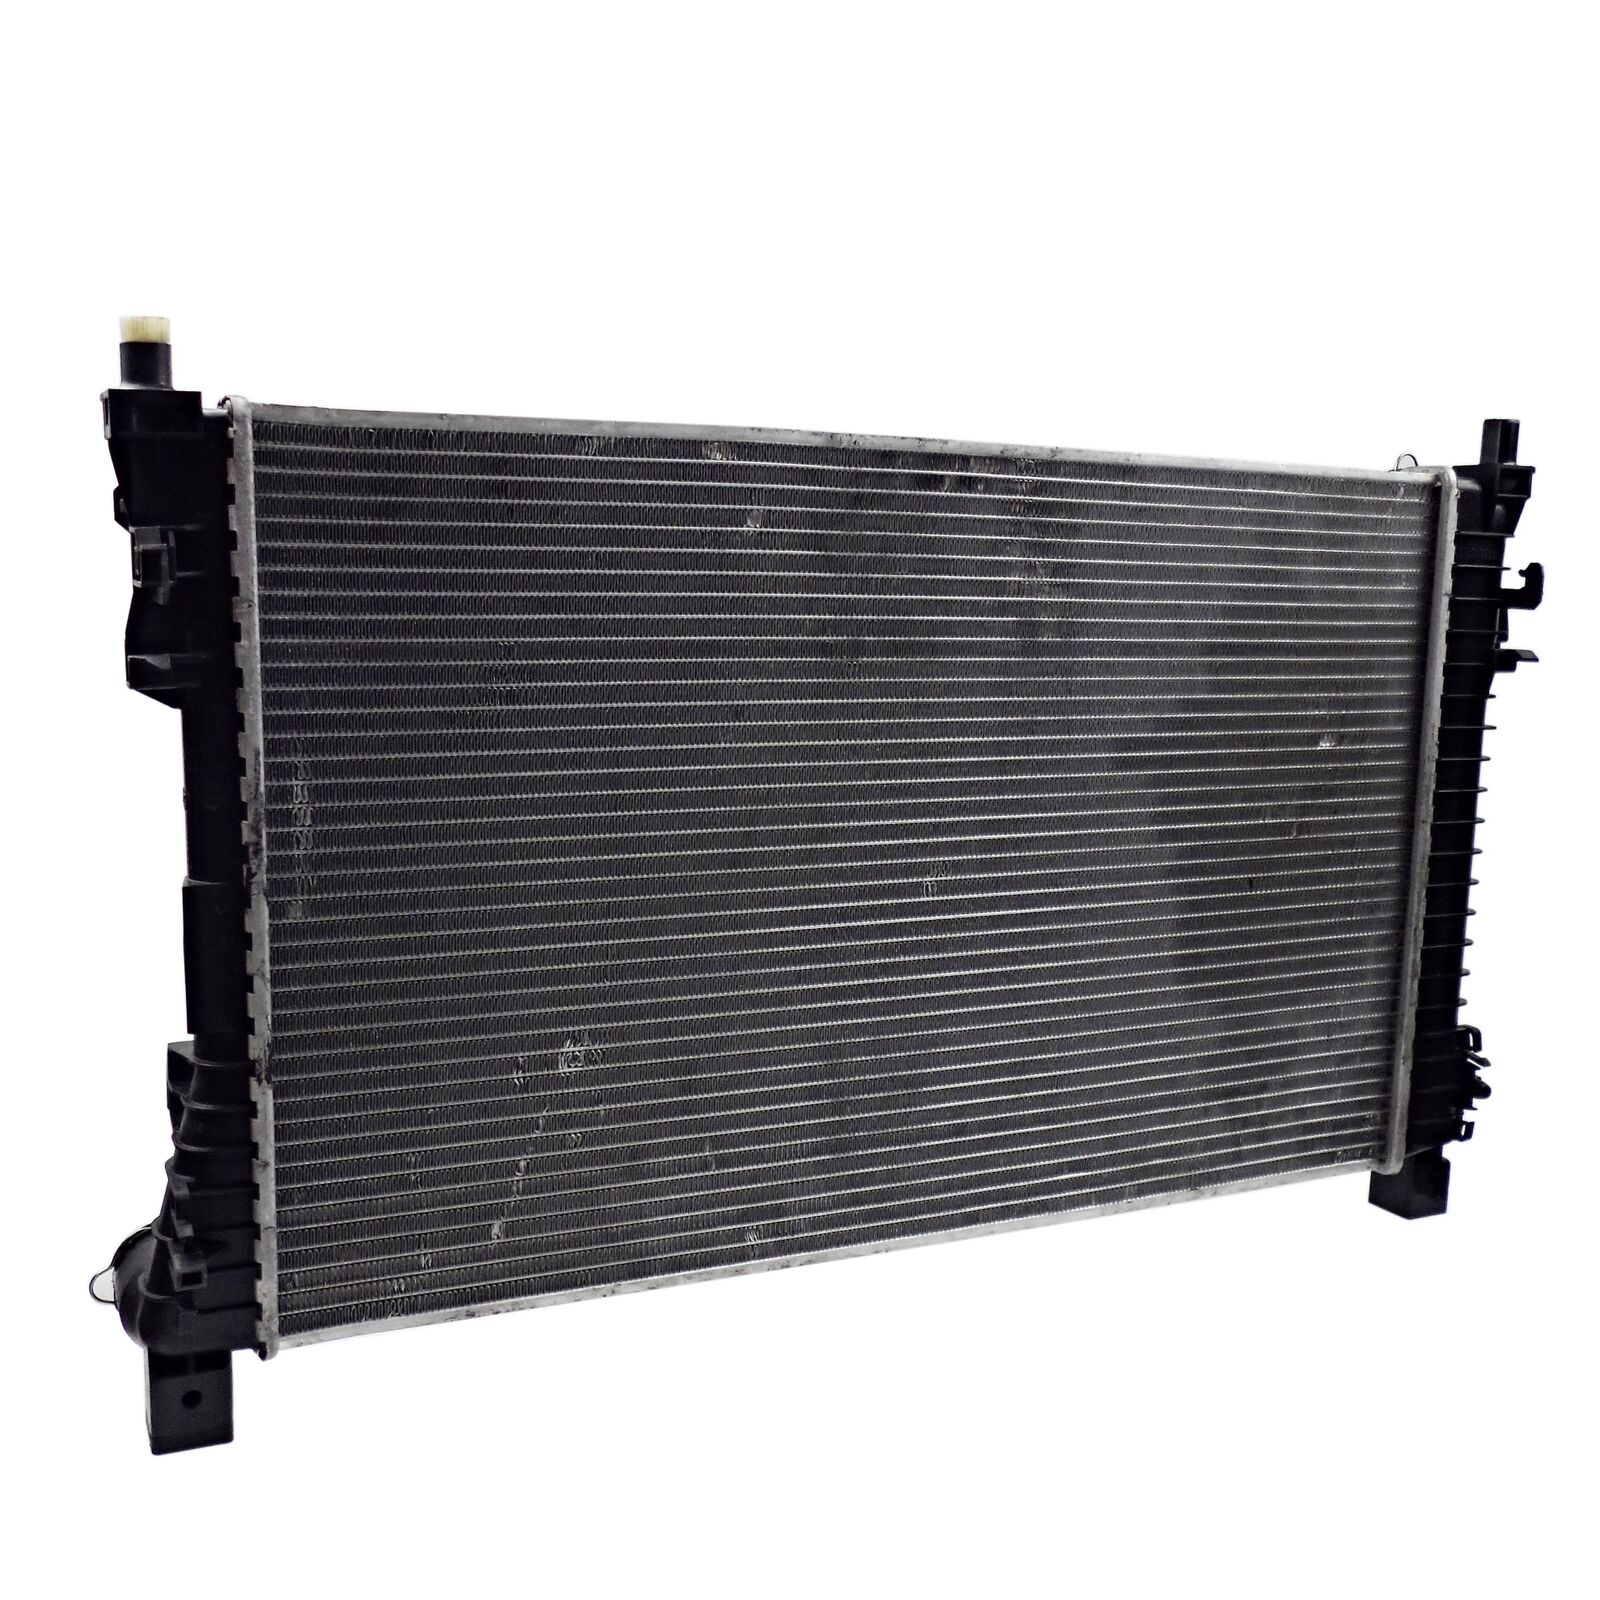 Engine Cooling Radiator for Mercedes W203 S203 CL203 A209 C209 R171 2000-2011 German Made